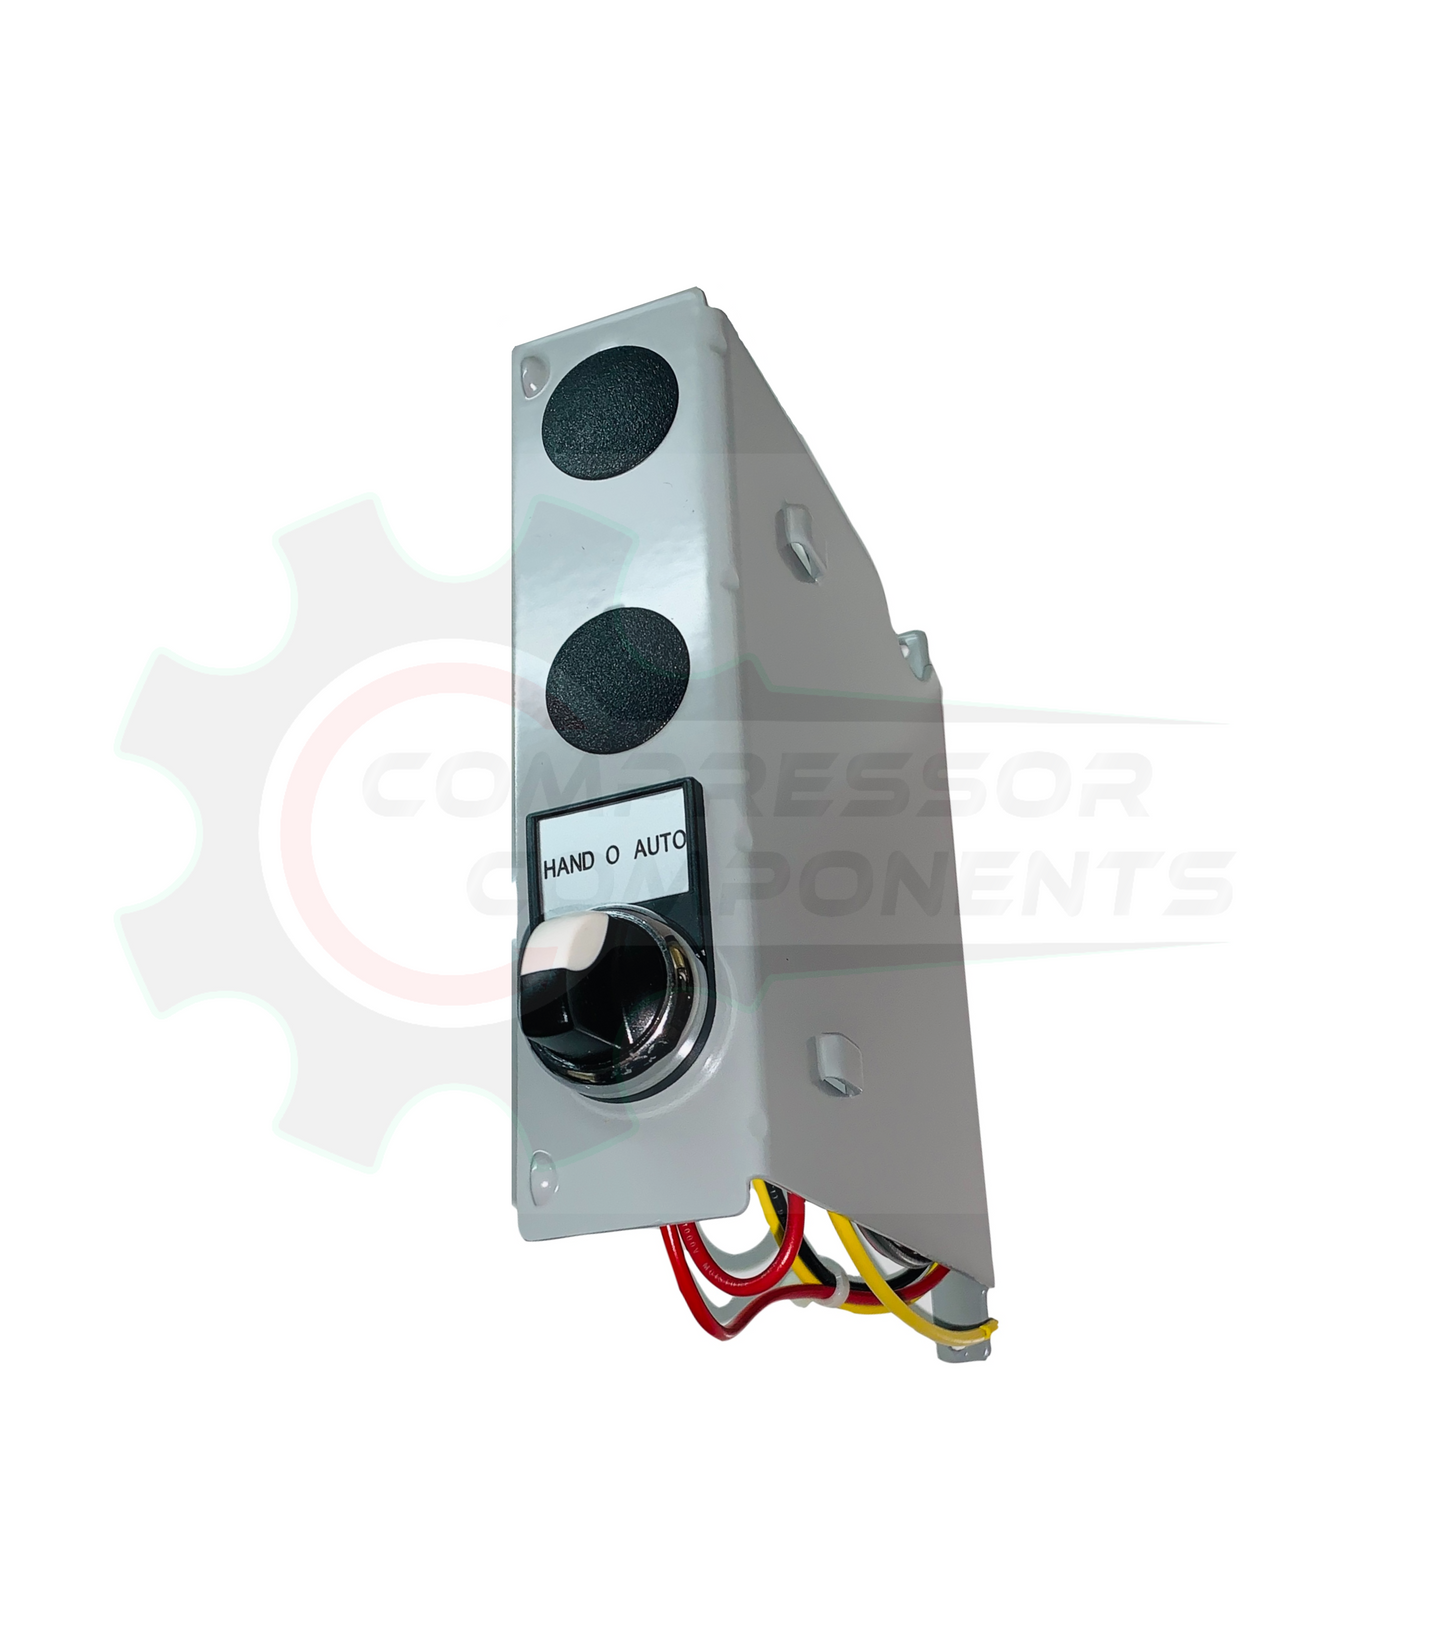 ON / OFF / AUTO SELECTOR SWITCH  /  C600M12